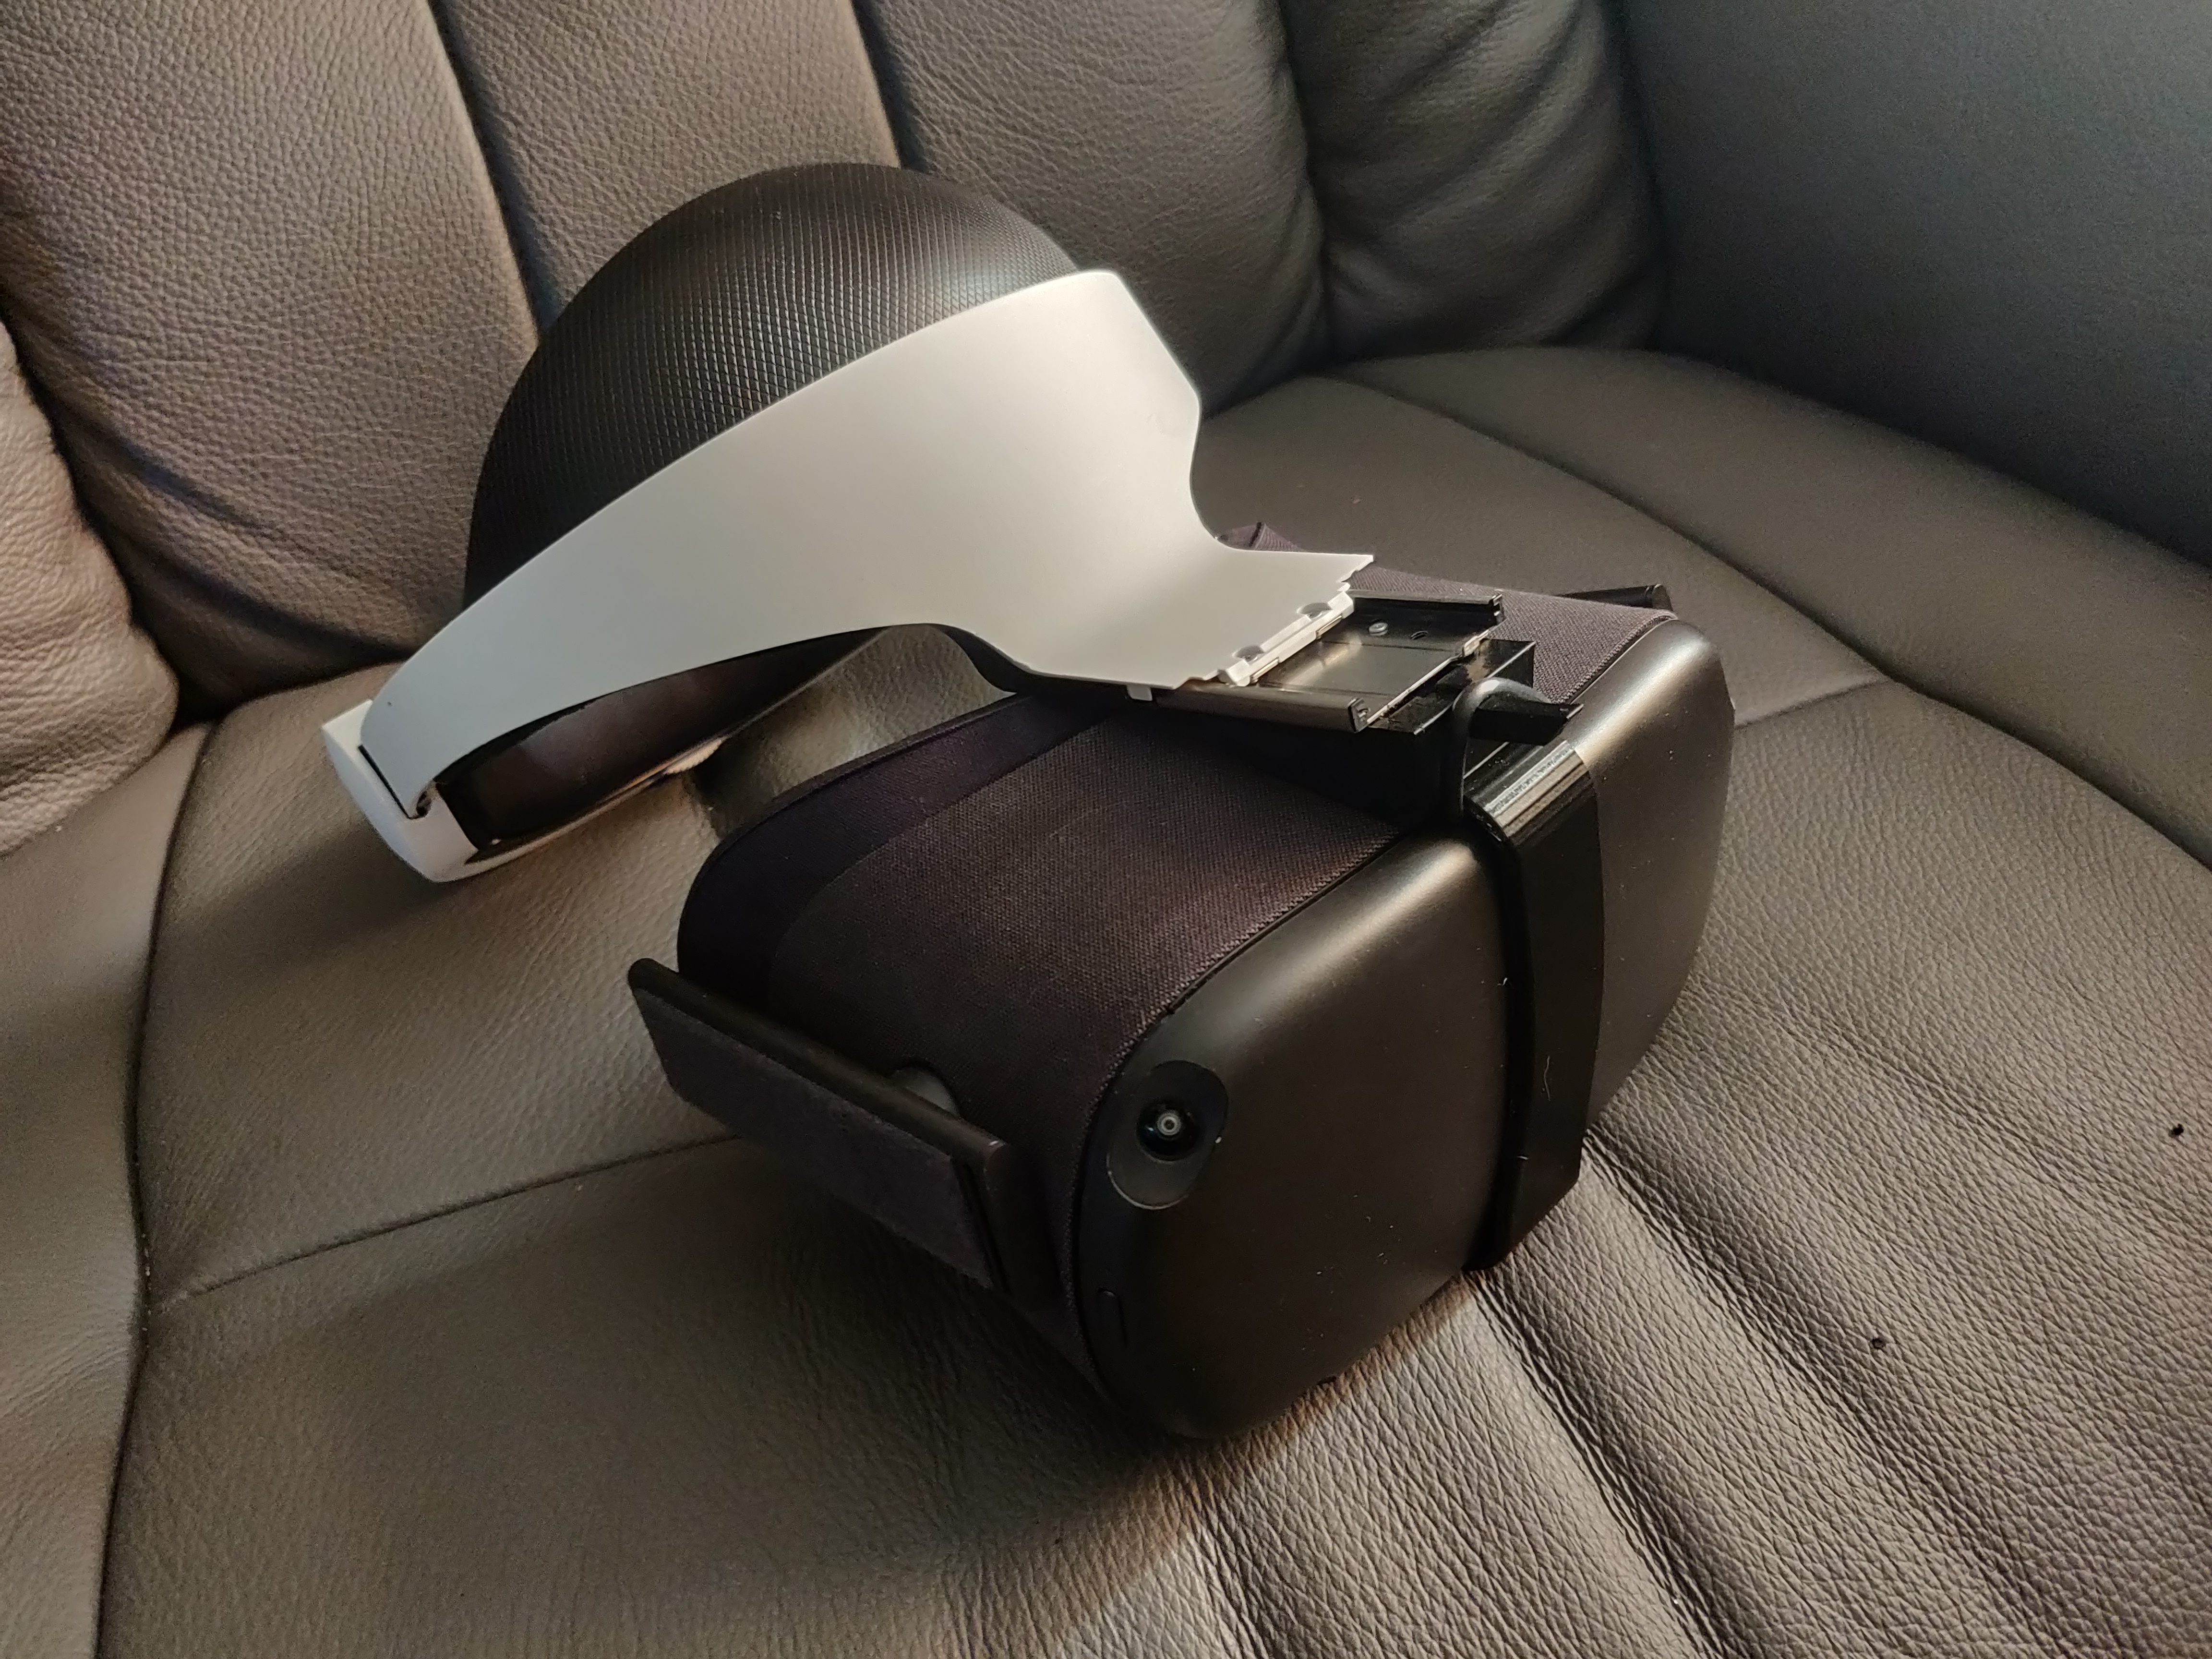 what is better oculus quest or psvr